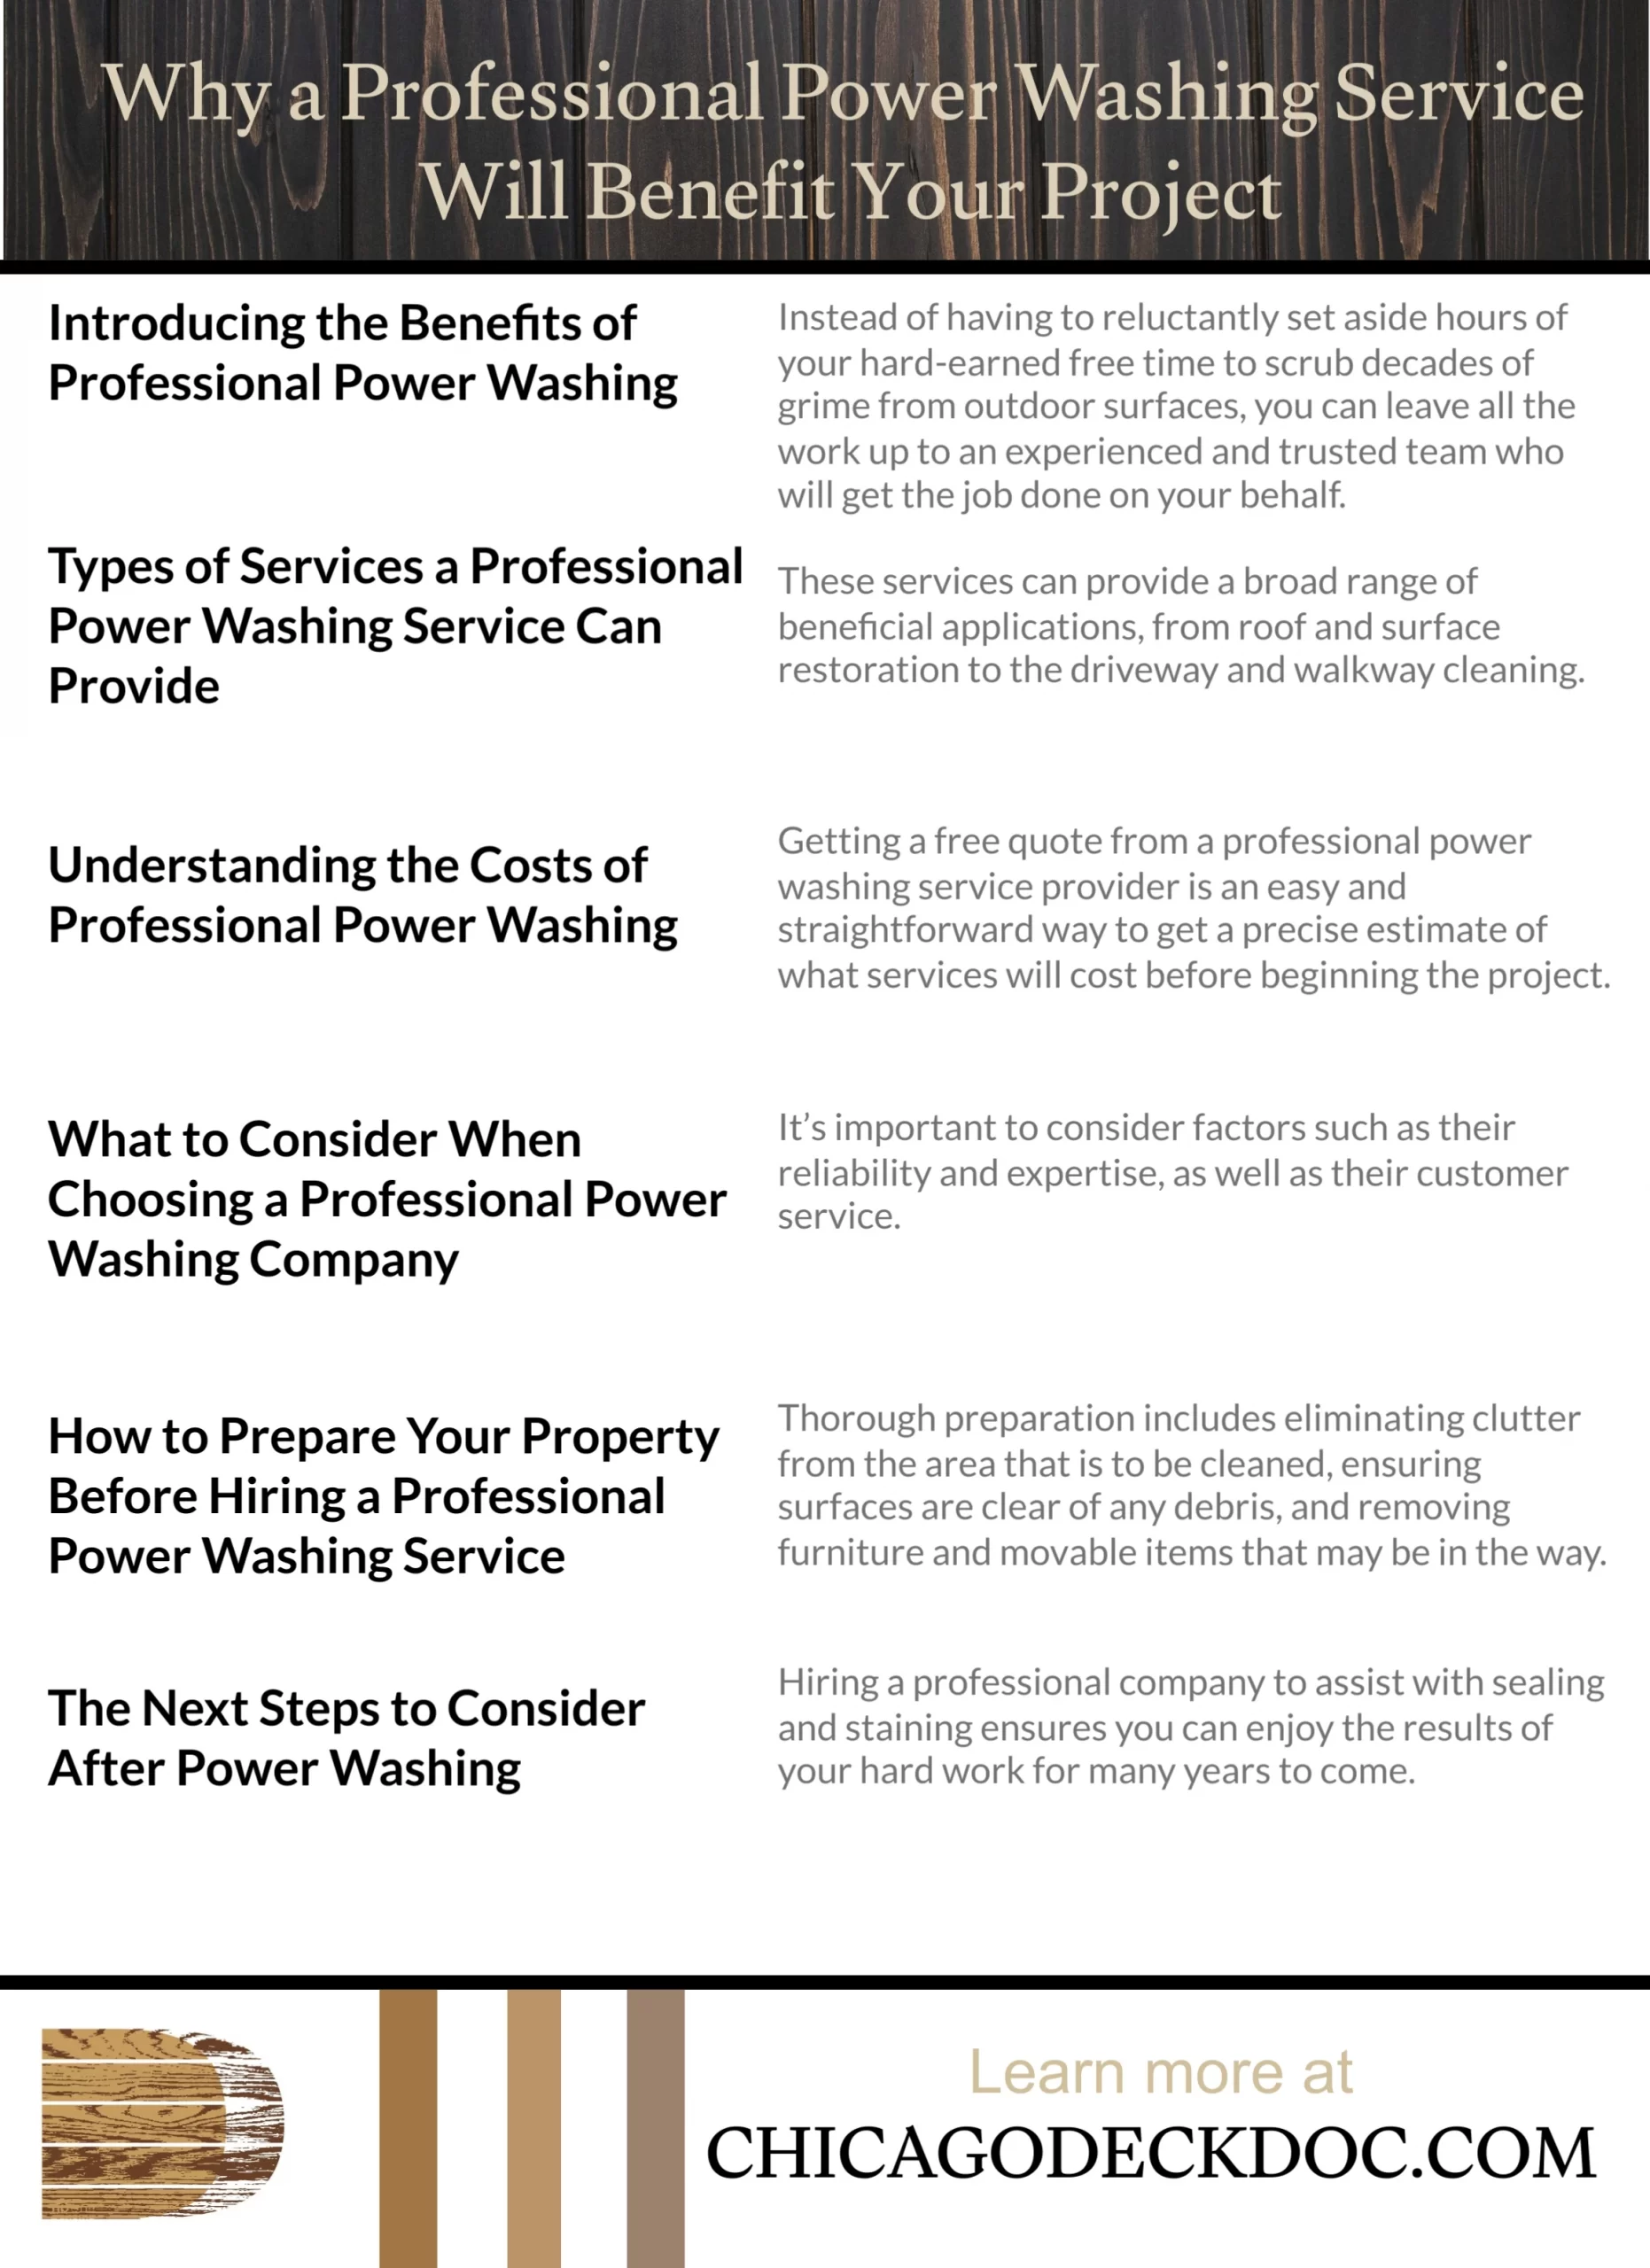 Why a Professional Power Washing Service Will Benefit Your Project